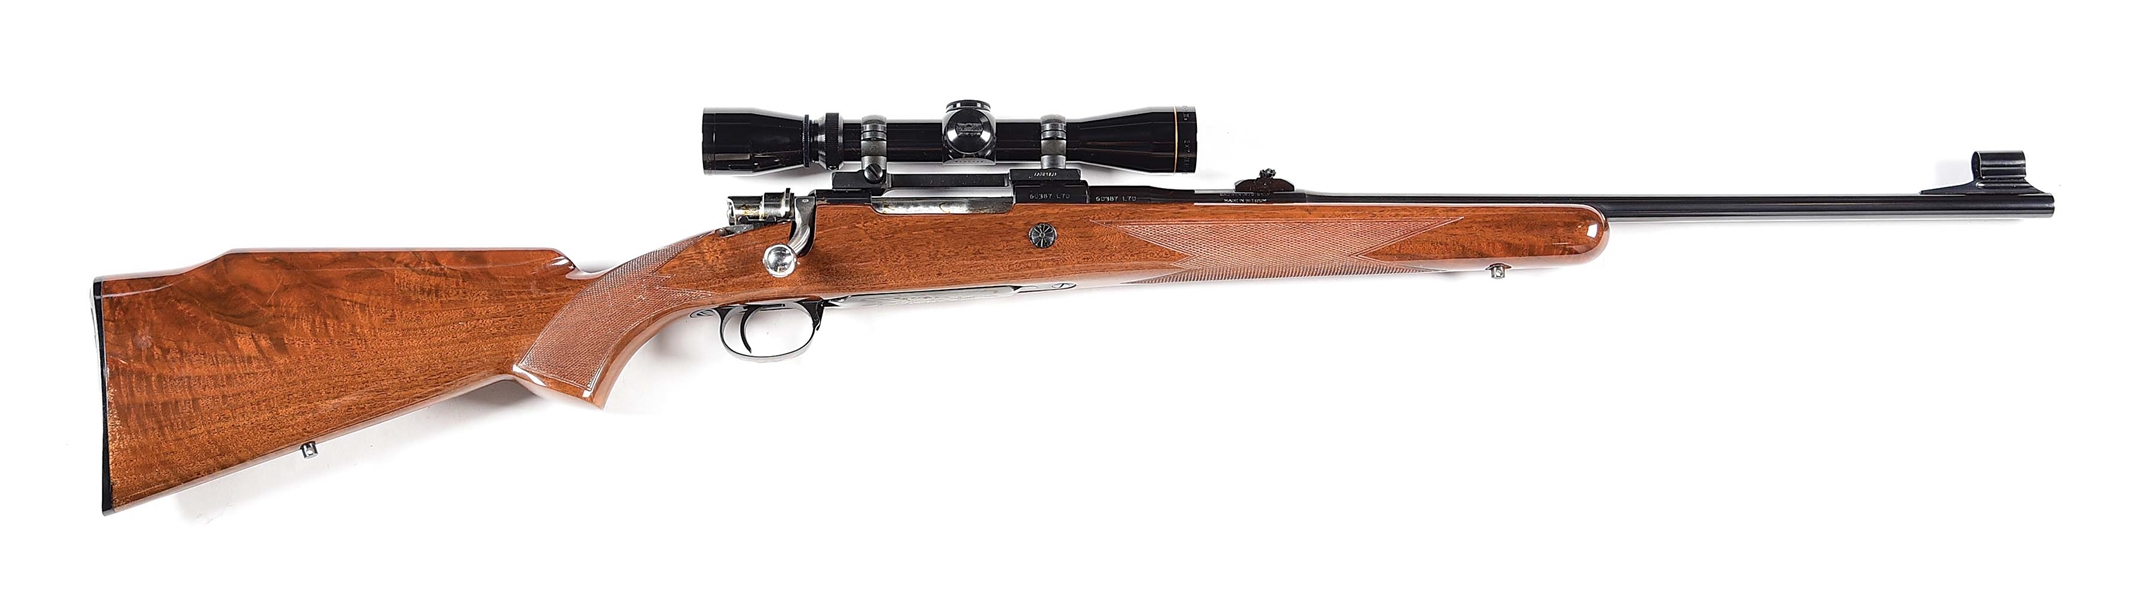 (C) BROWNING SAFARI BOLT ACTION RIFLE WITH LEUPOLD SCOPE.